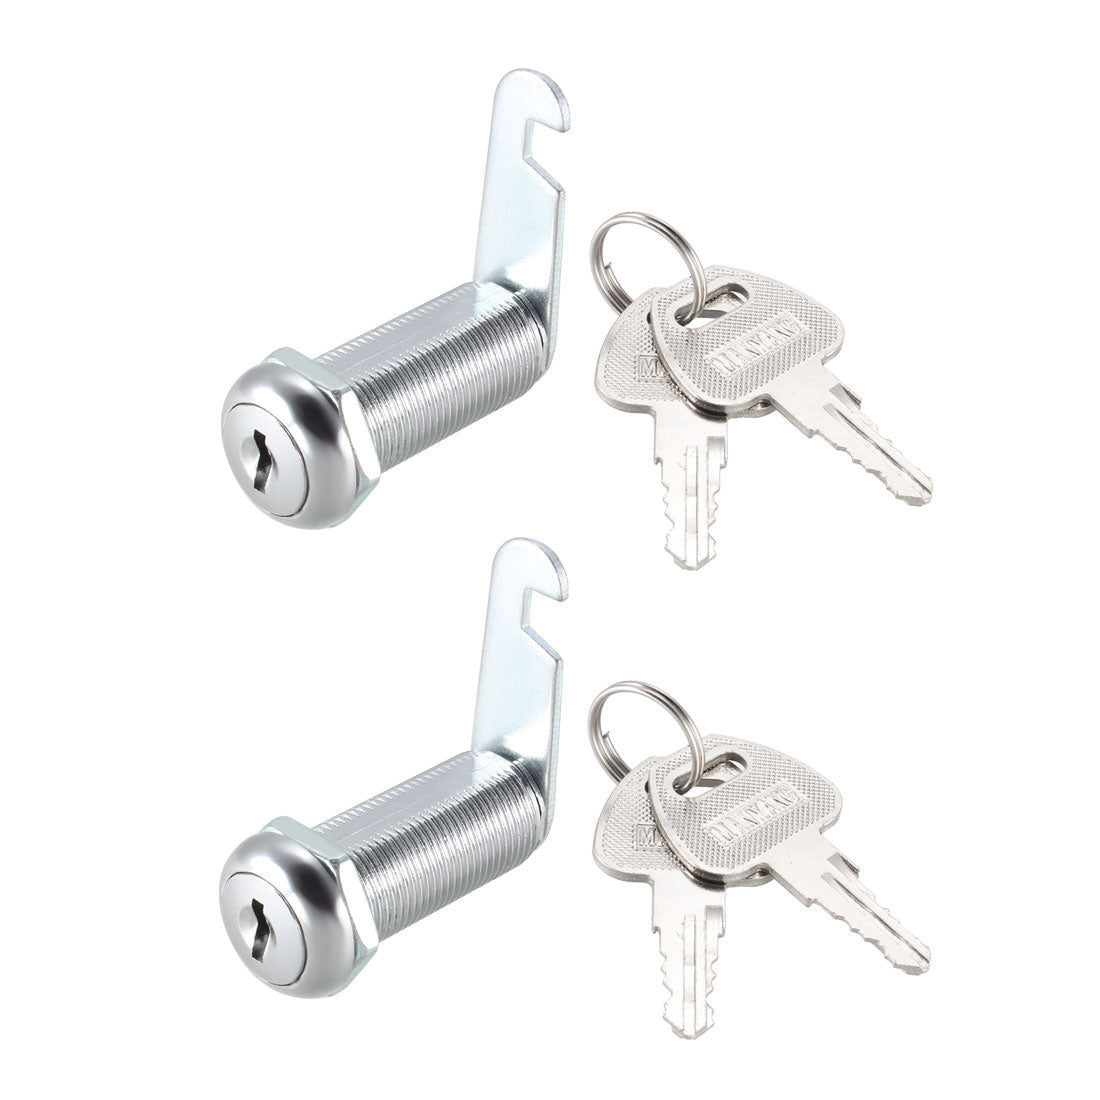 uxcell Uxcell Cam Locks 40mm Cylinder Length Fit Max 1-3/8-inch Panel Keyed Different 2Pcs